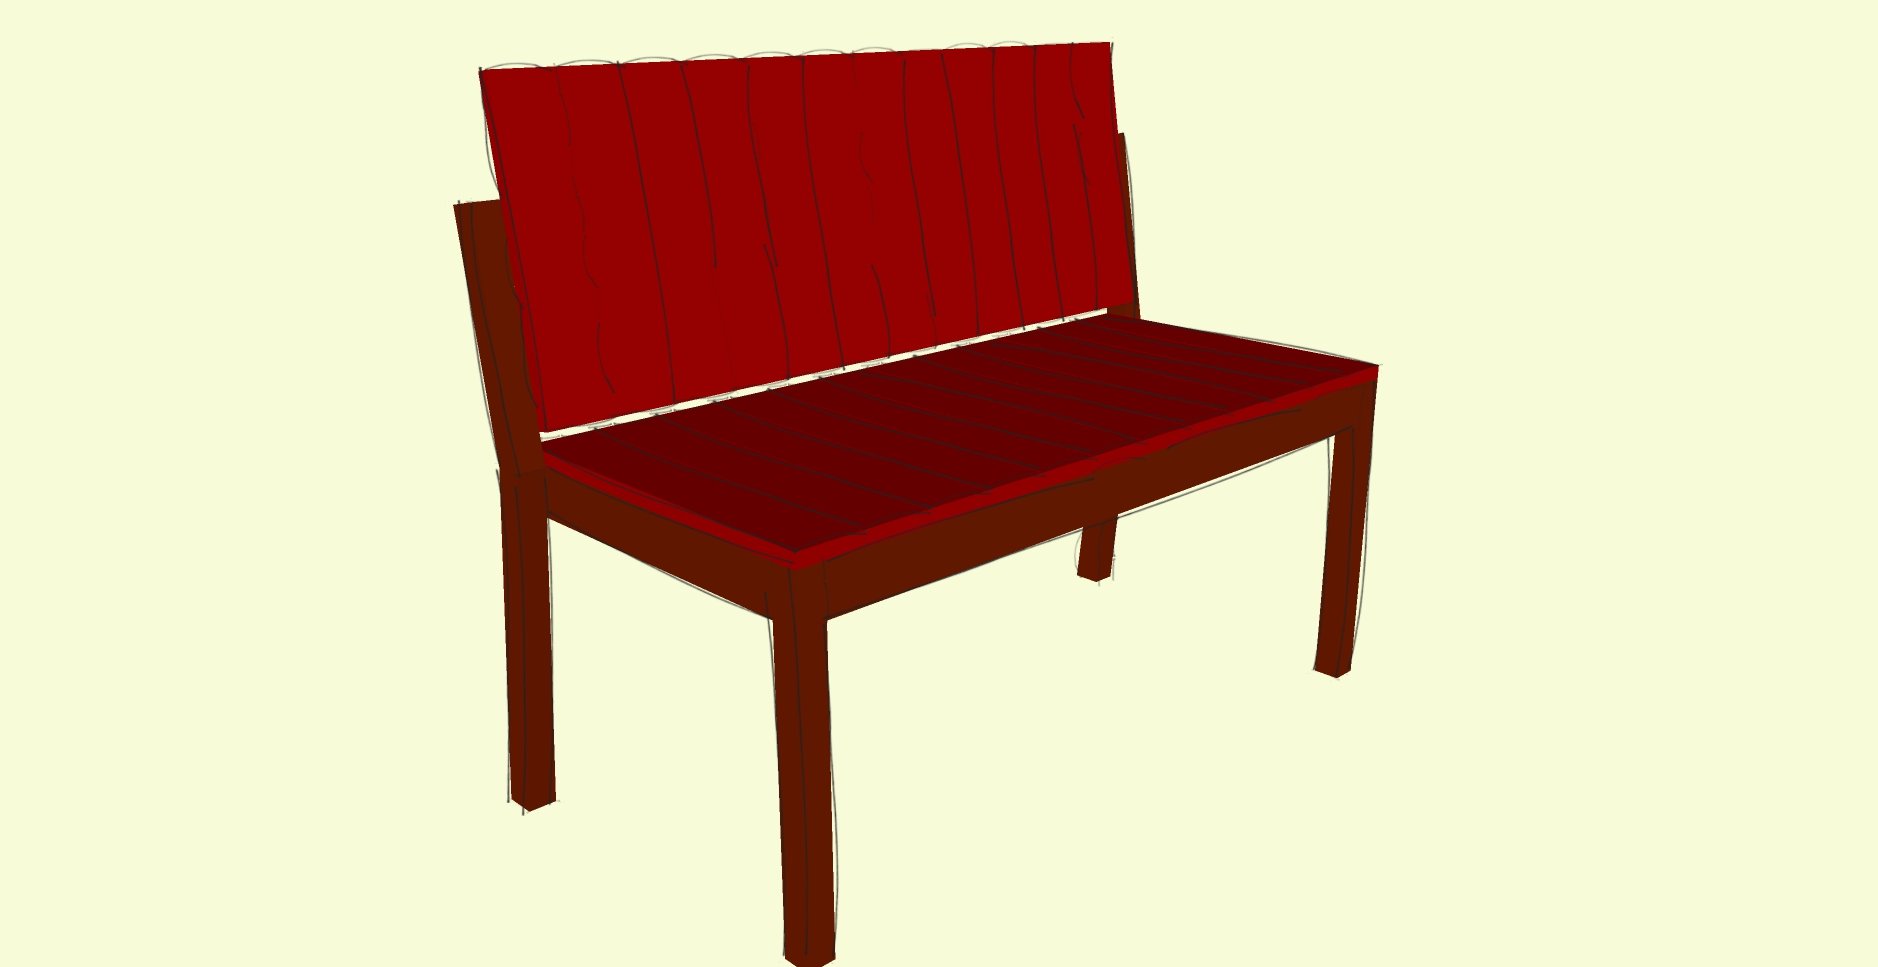 How to Build an Outdoor Bench